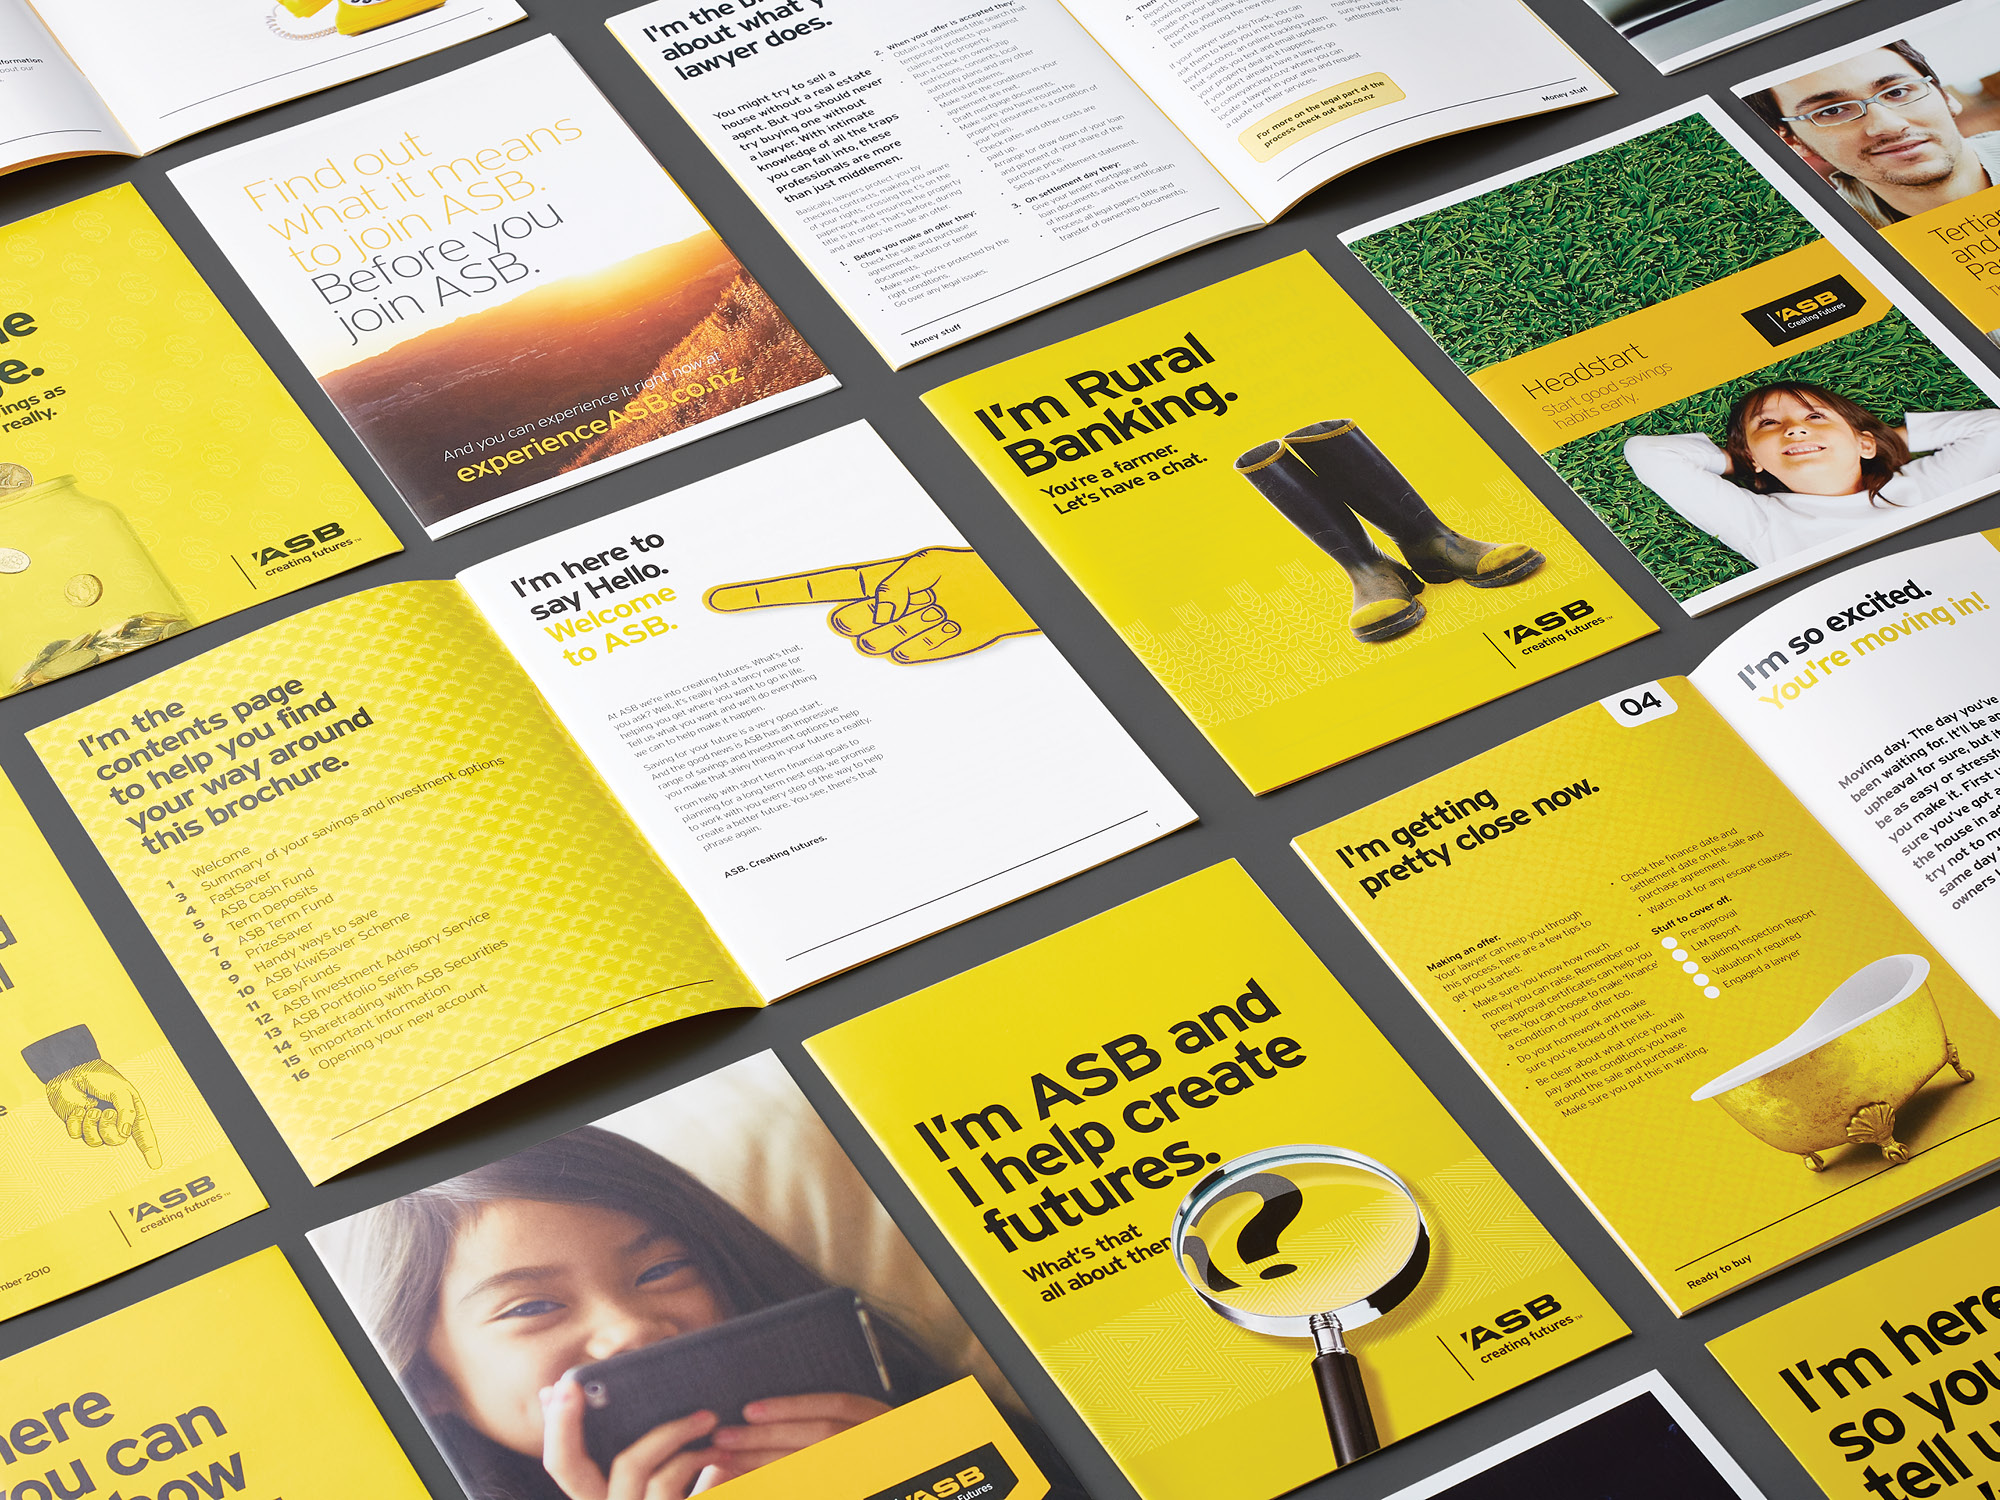 onfire design asb bank branding collateral graphic design 5